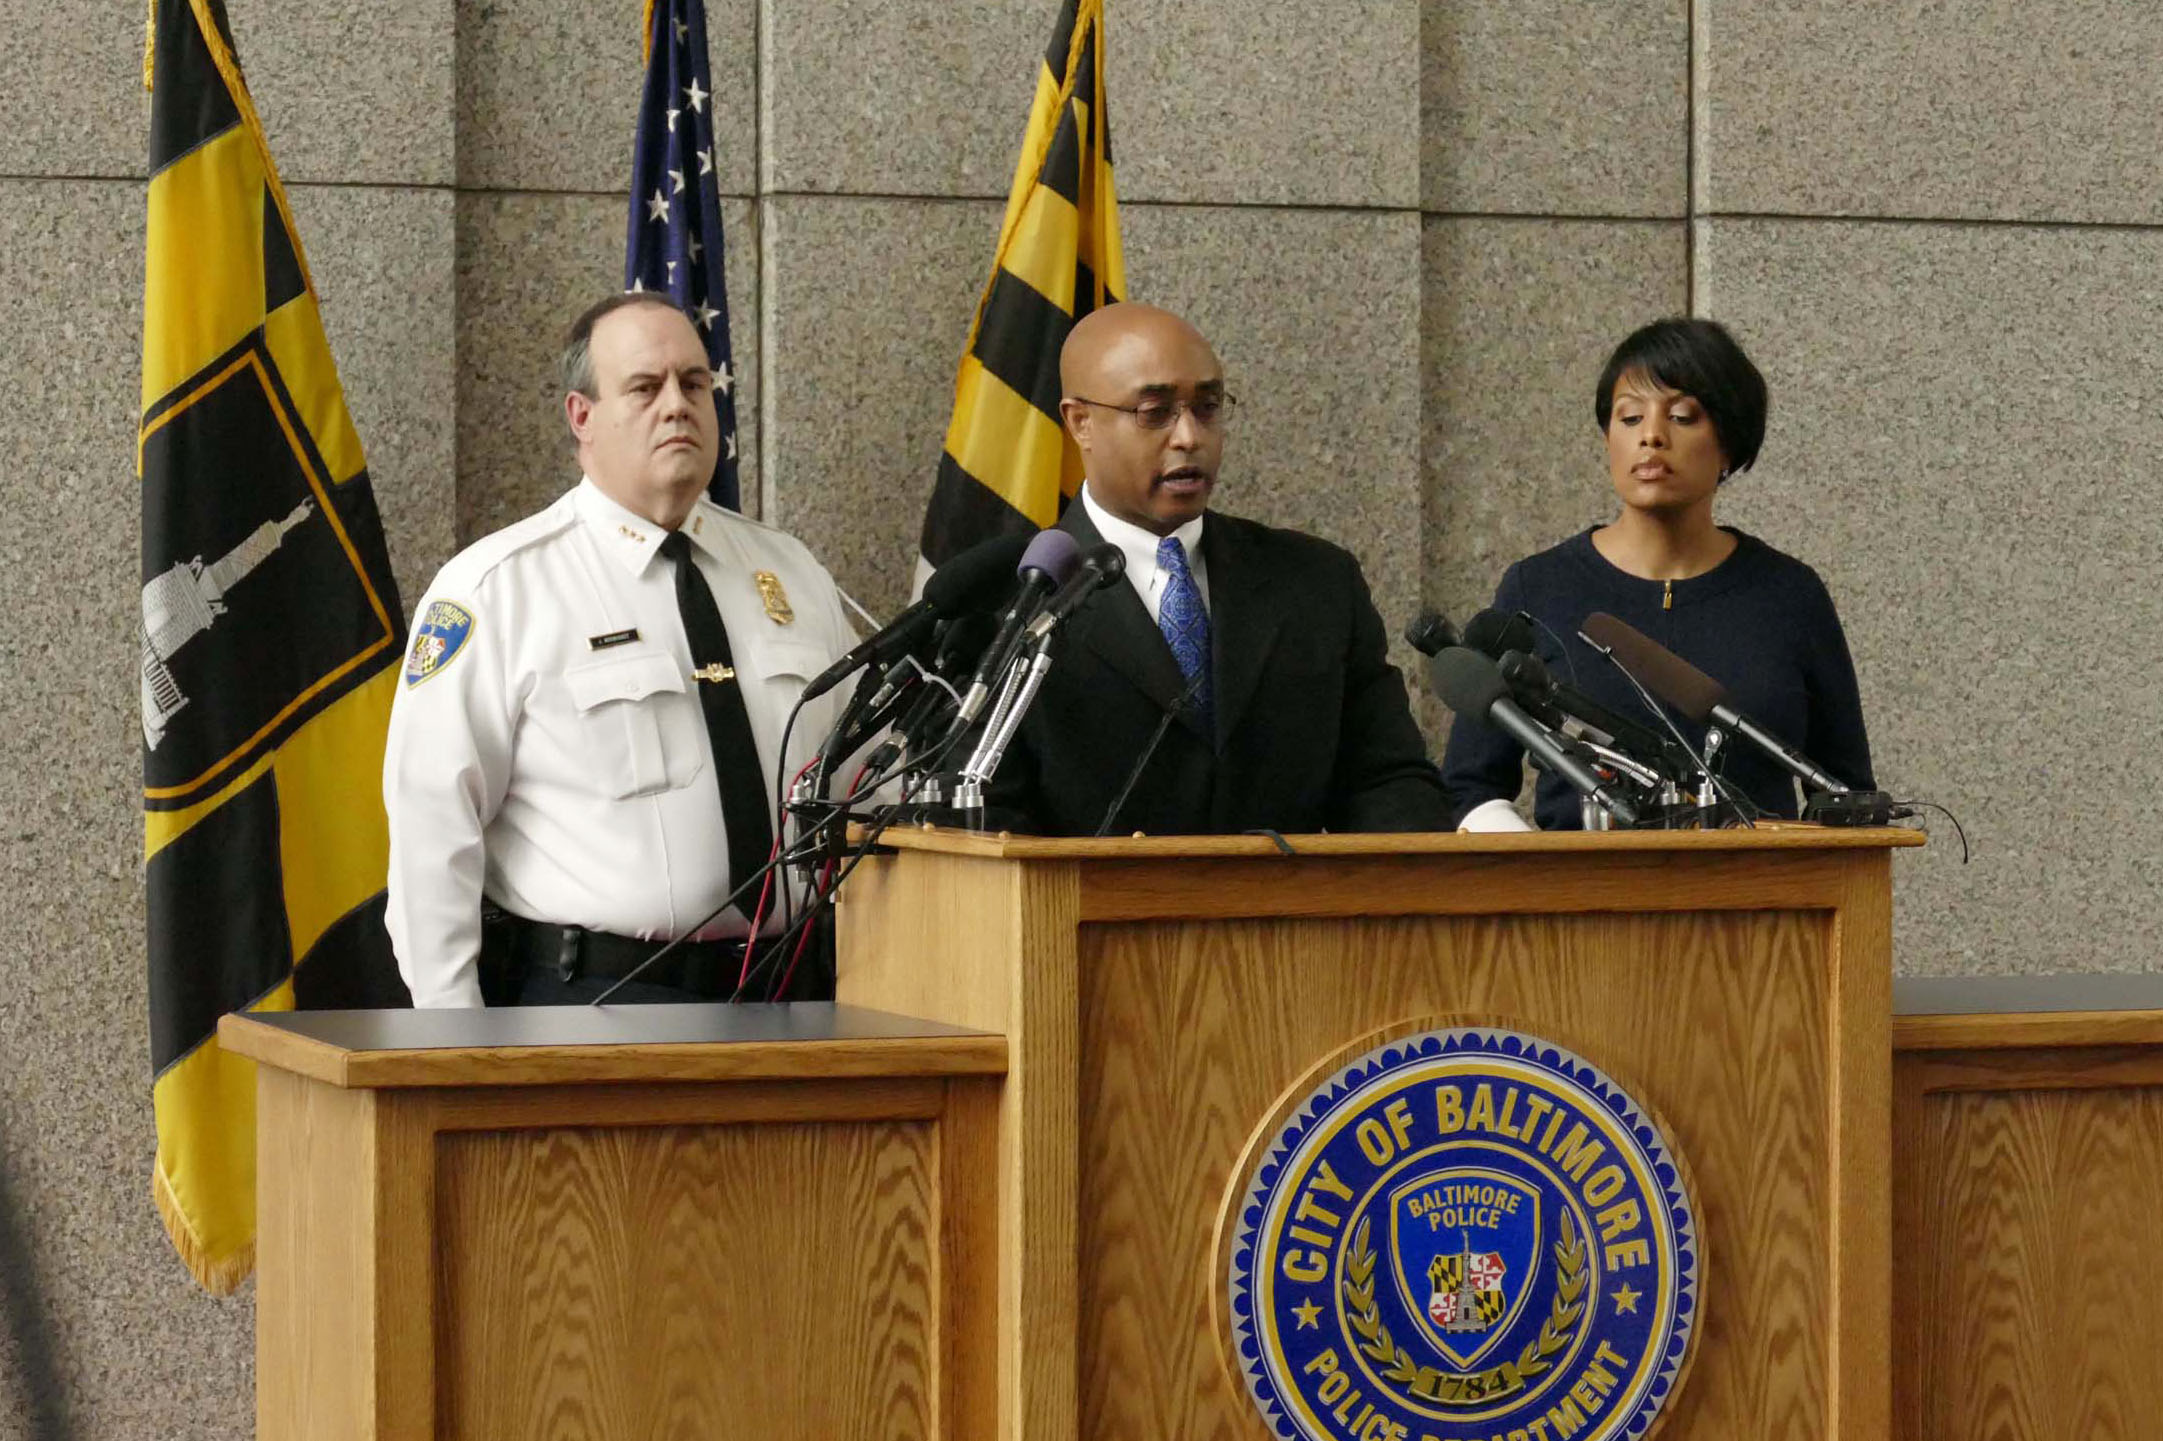 PHOTO: Police Commissioner Anthony W. Batts, center, speaks to the media at a news conference on the death of Freddie Grey with Deputy Commissioner Jerry Rodriguez, left, and Mayor Stephanie Rawlings-Blake in Baltimore, Monday, April 20, 2015.